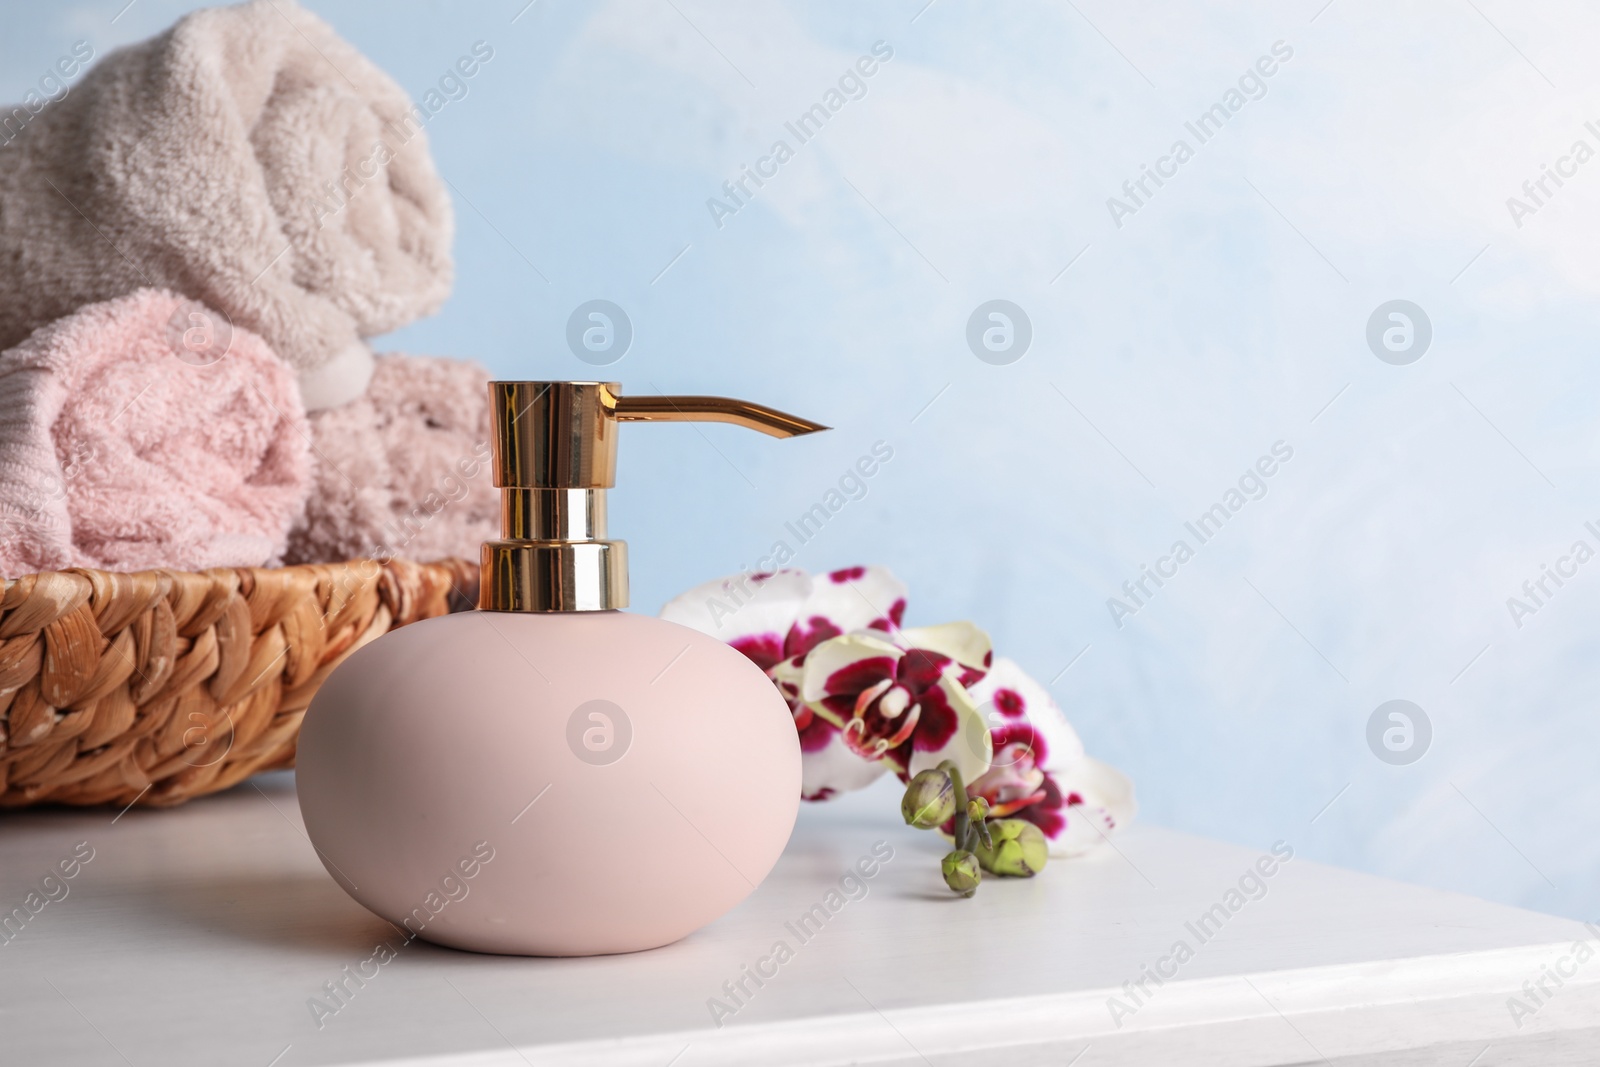 Photo of Stylish soap dispenser, towels in wicker basket and flowers on table. Space for text